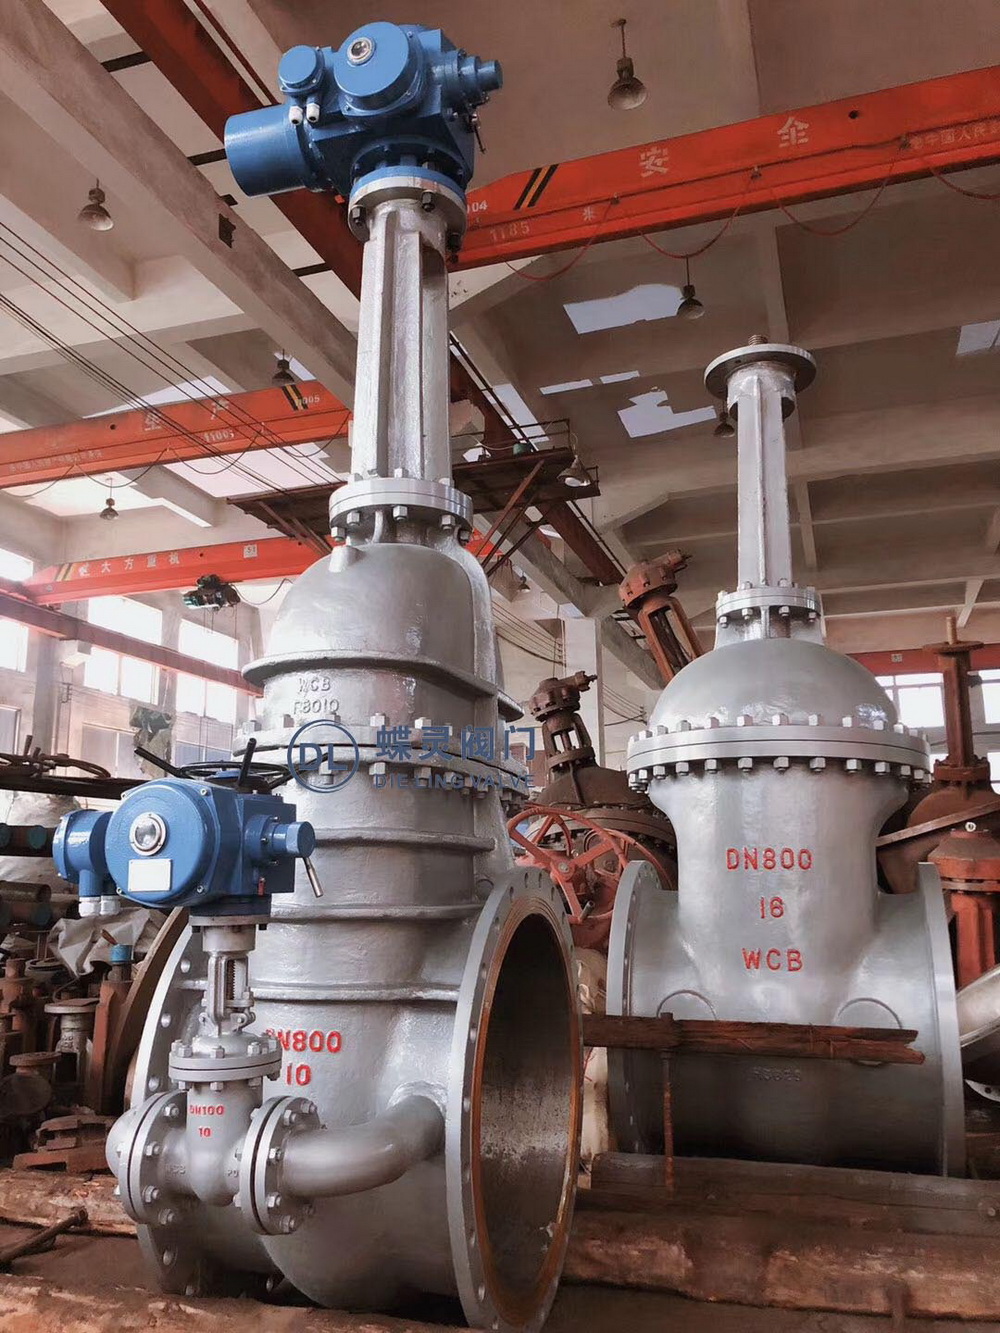 Chinese gate valve manufacturer revealed: How to become an industry leader?   